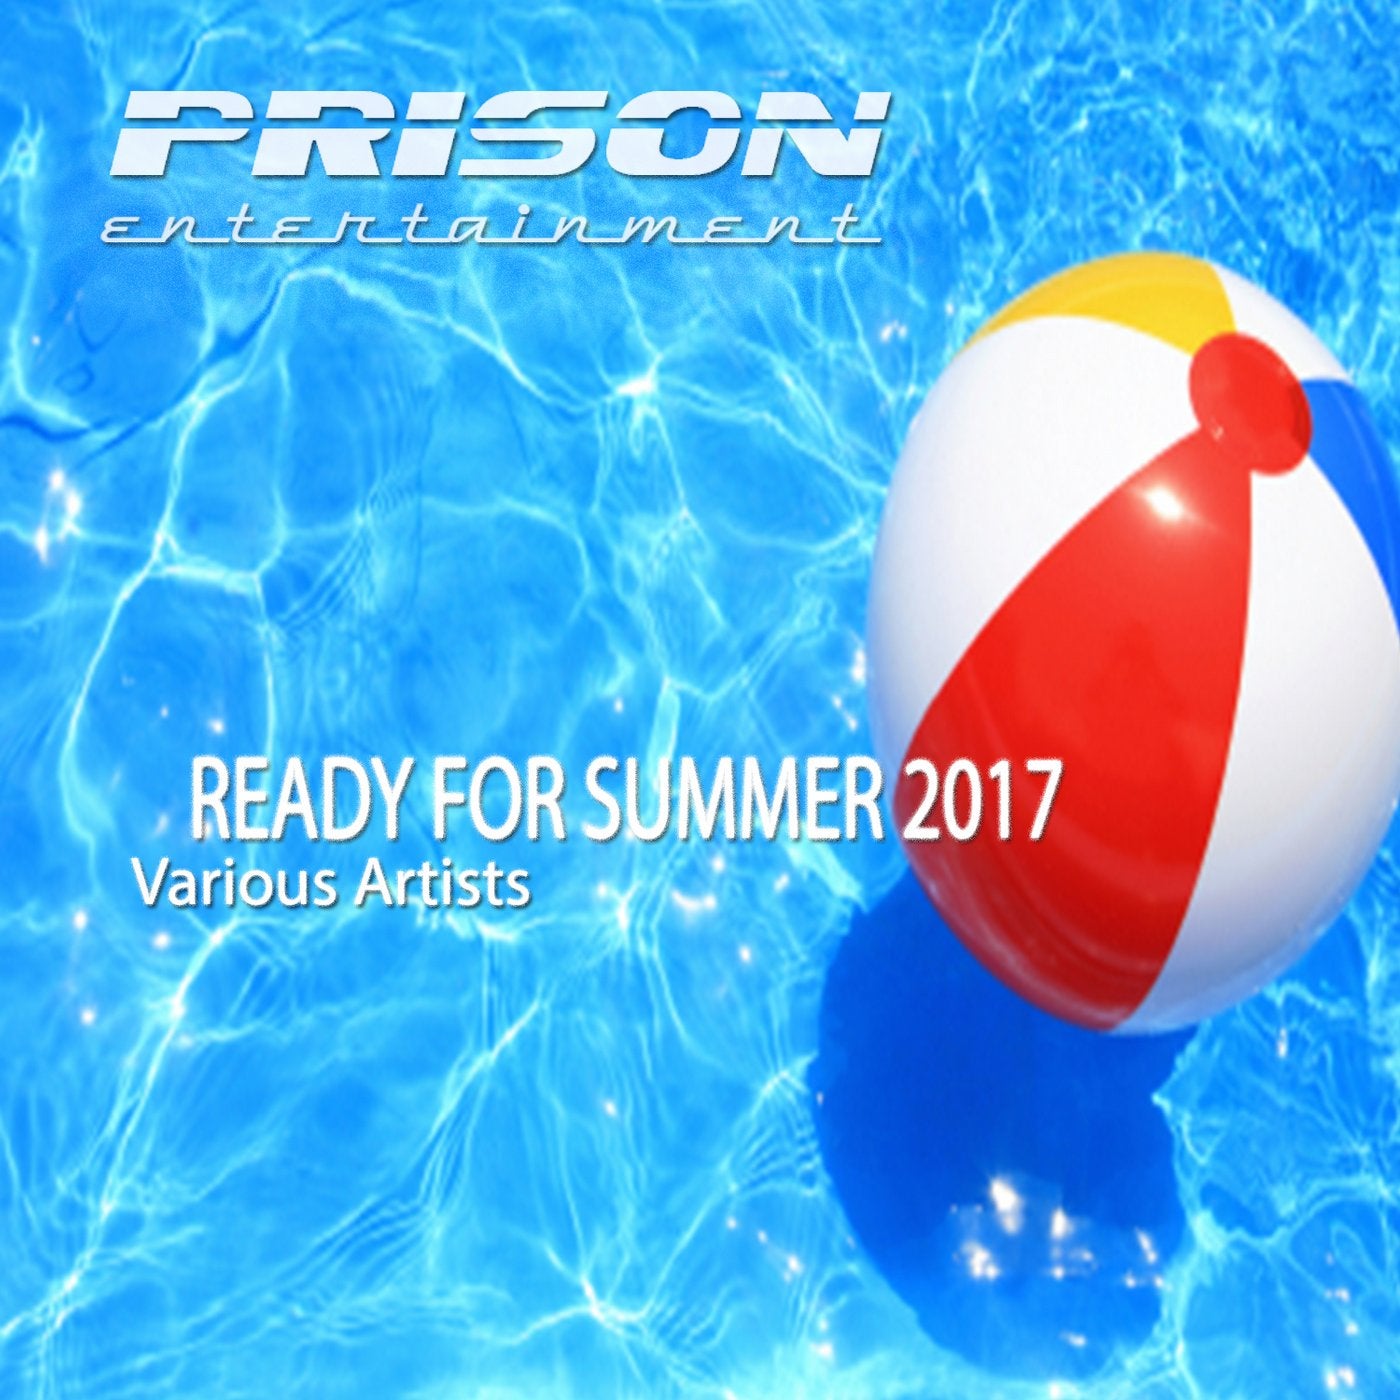 READY FOR SUMMER 2017